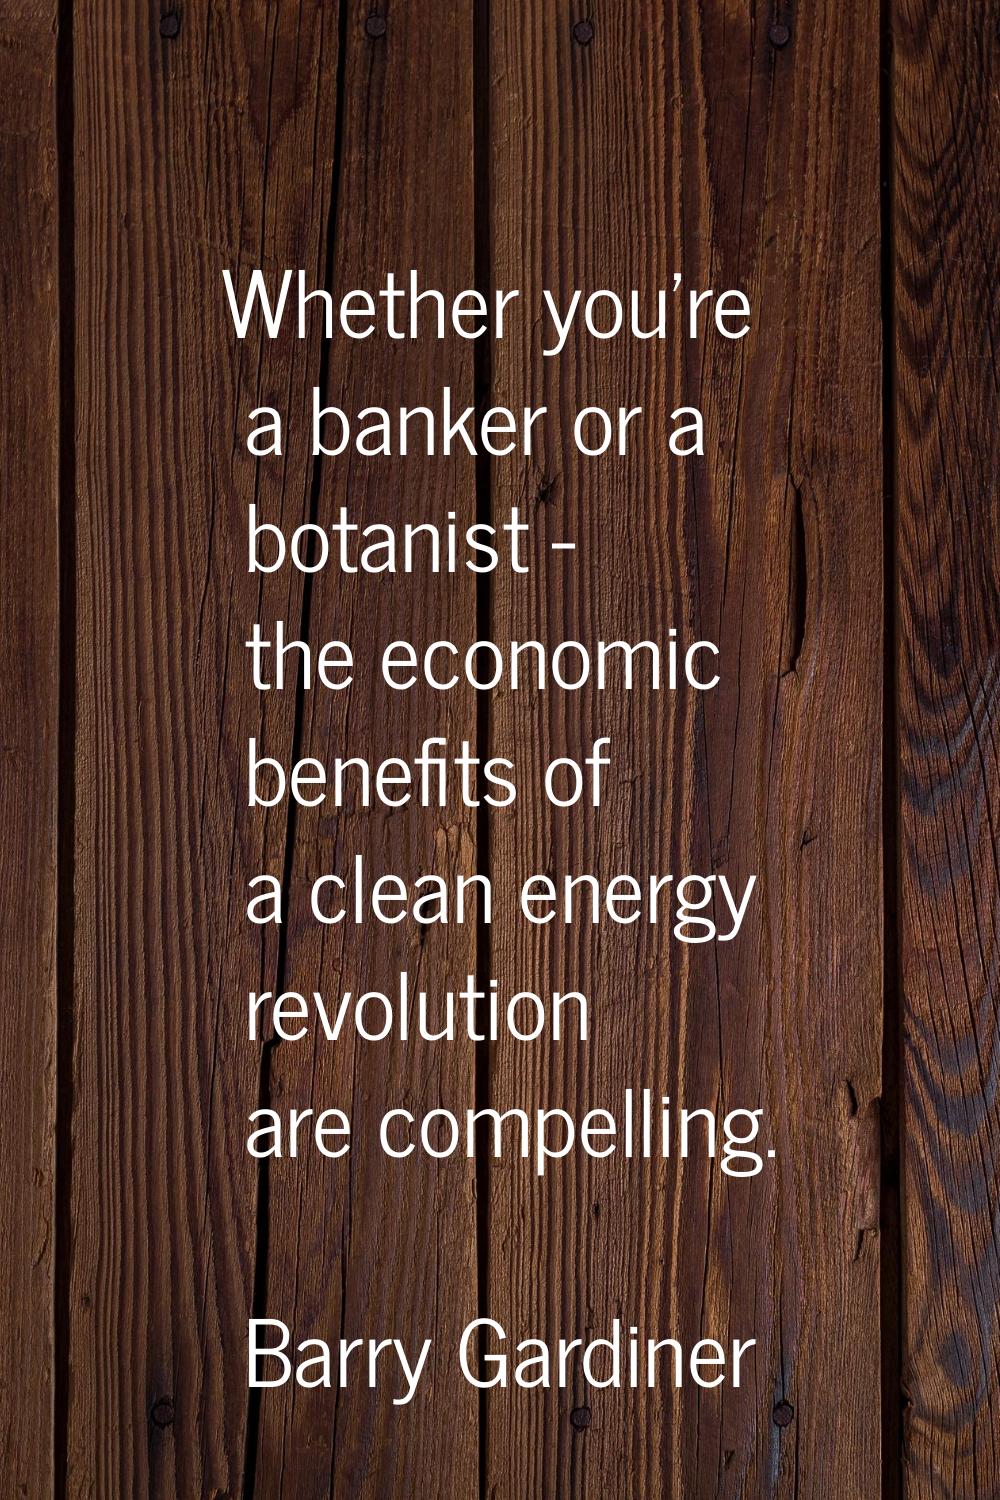 Whether you're a banker or a botanist - the economic benefits of a clean energy revolution are comp